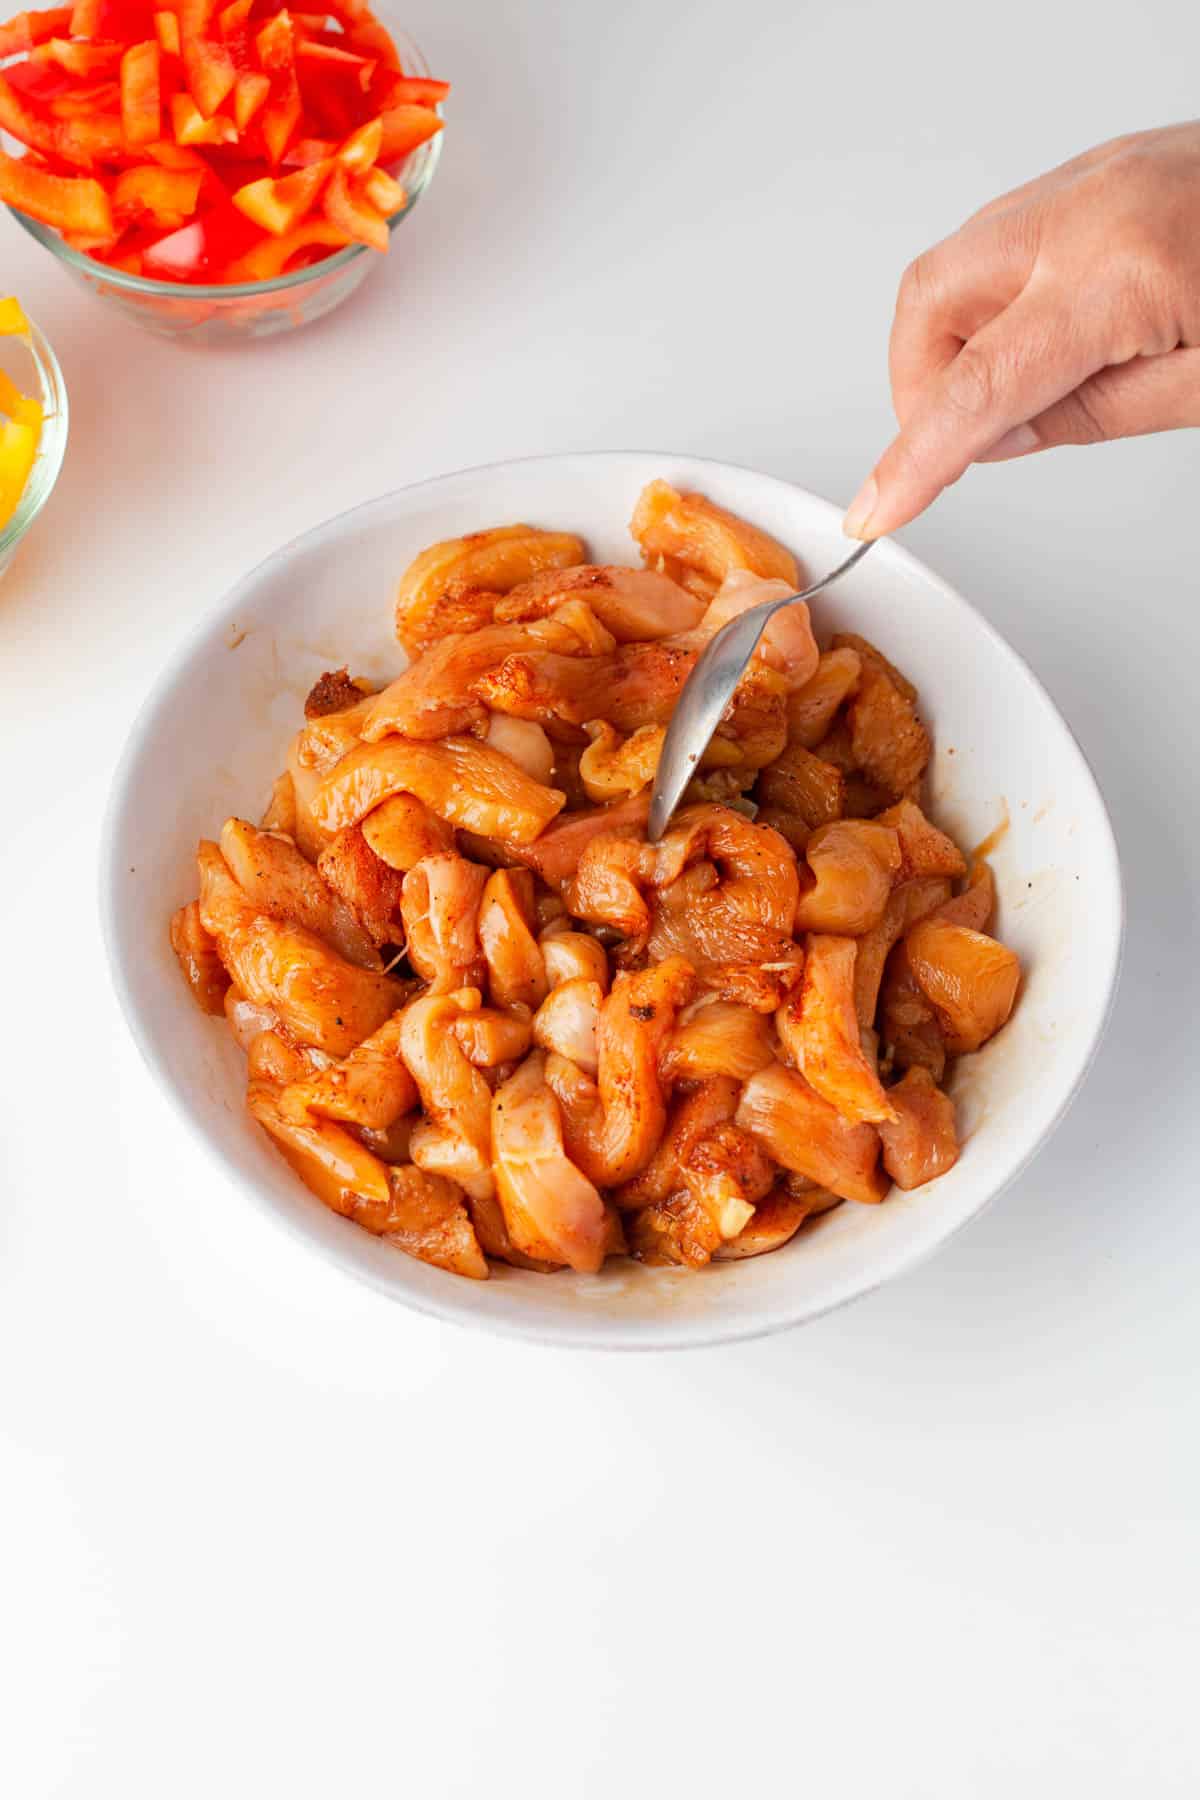 Stirring sliced chicken pieces in a bowl with fajita seasoning to evenly coat them in spices.